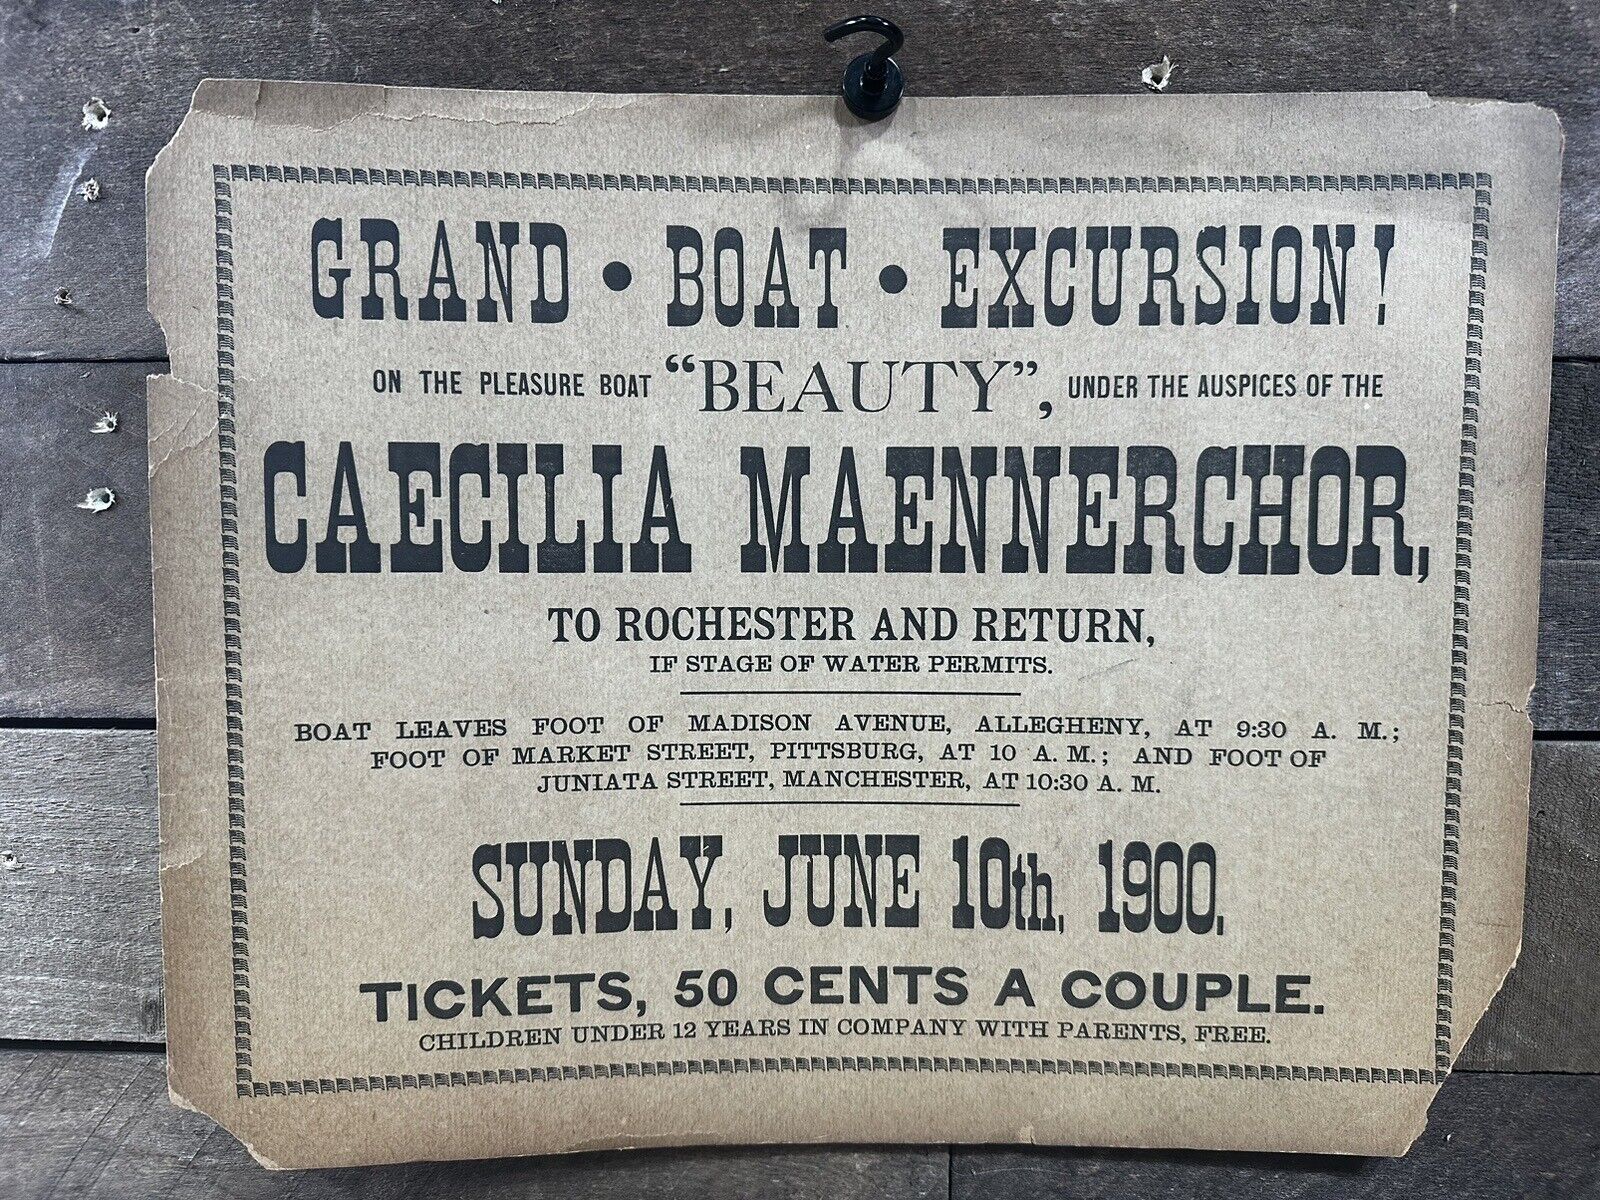 Vintage “Grand Boat Excursion” Advertisment Allegheny, PA